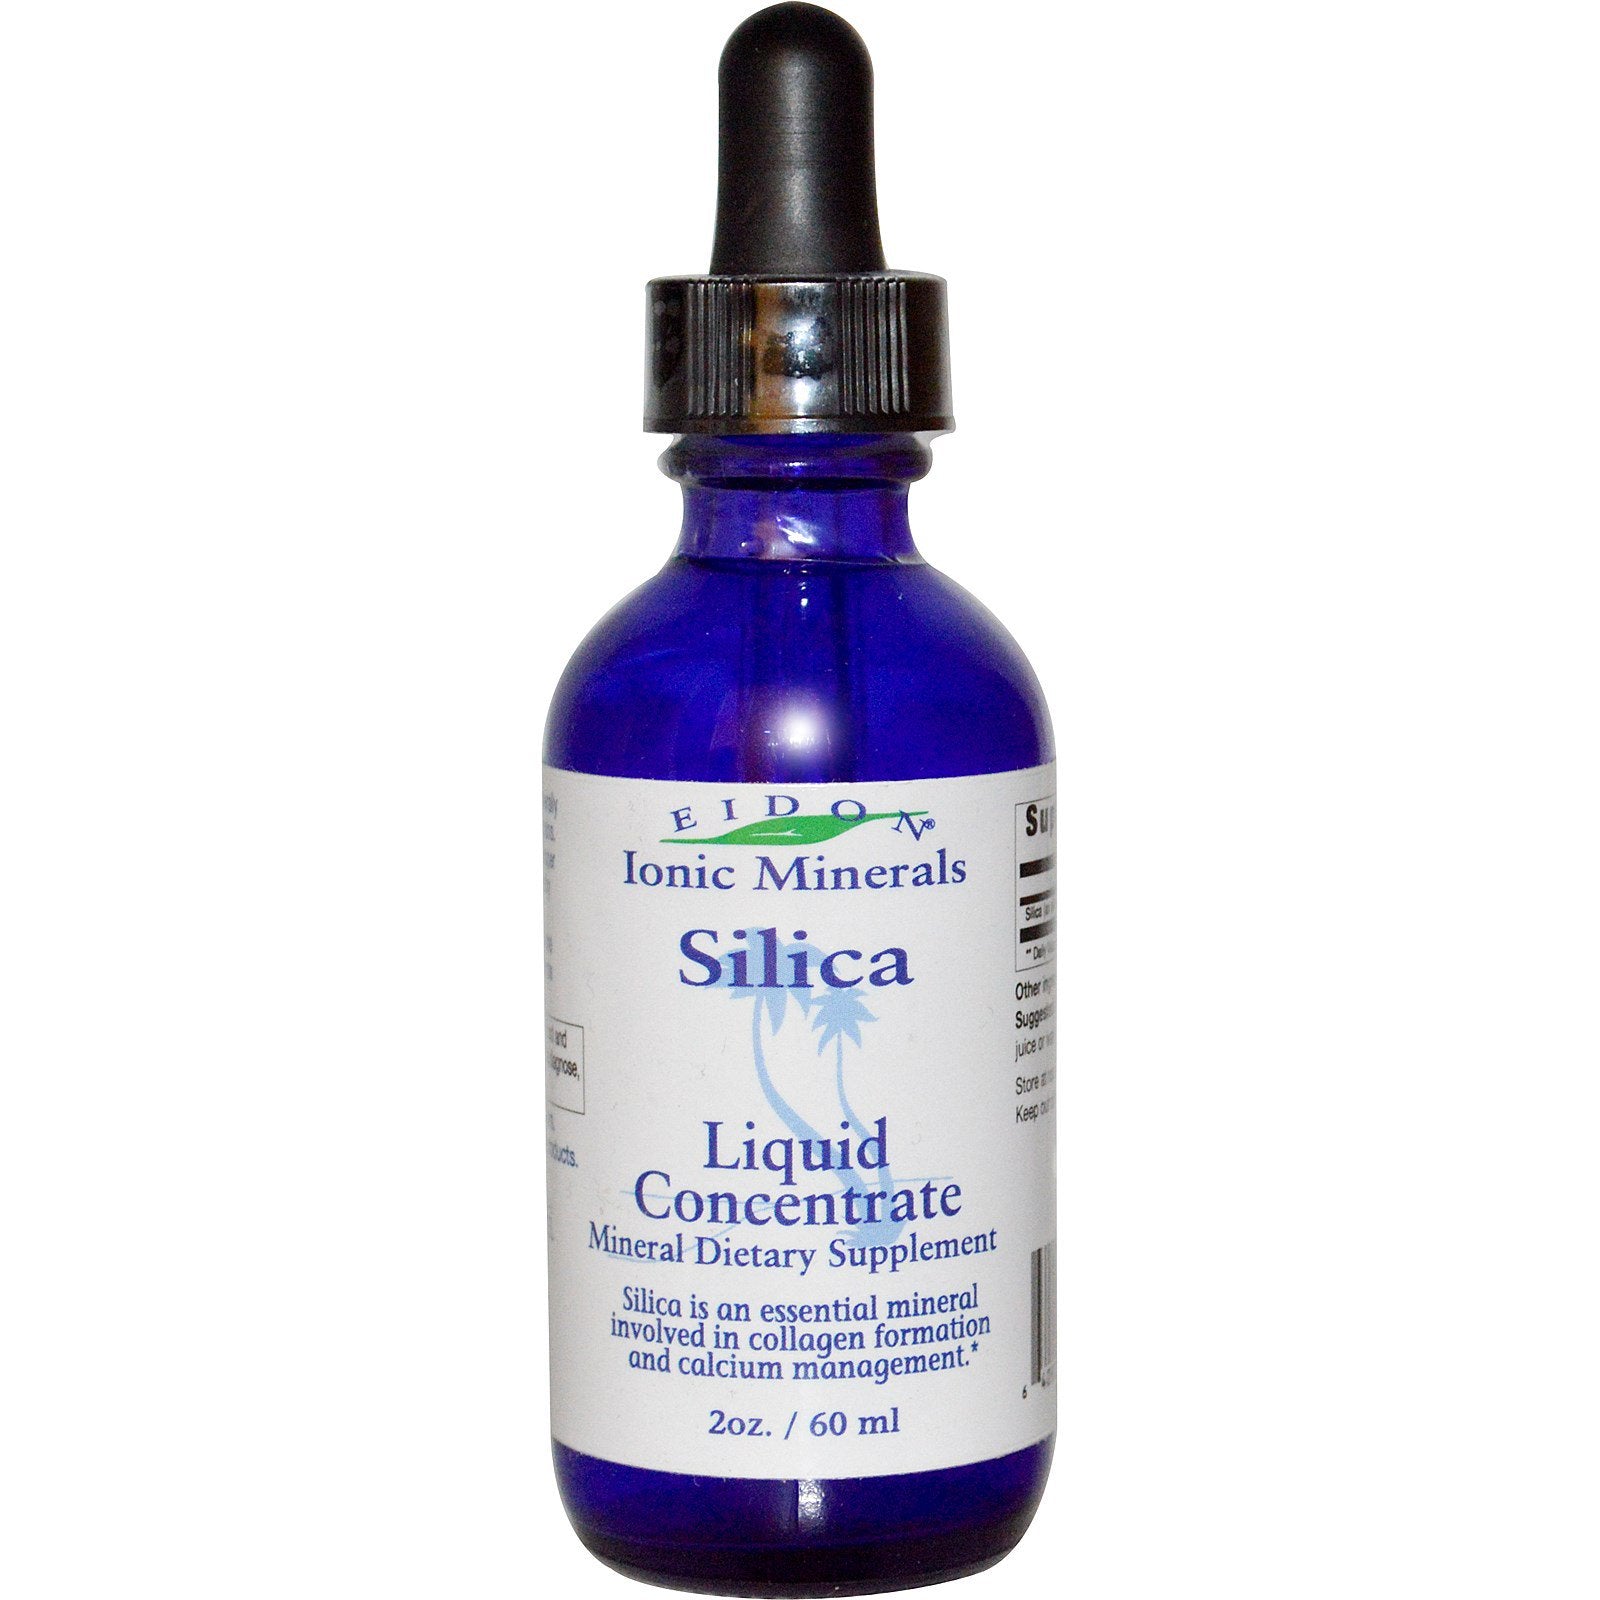 Eidon Mineral Supplements, Ionic Minerals, Silica, Liquid Concentrate, 2 oz (60 ml)